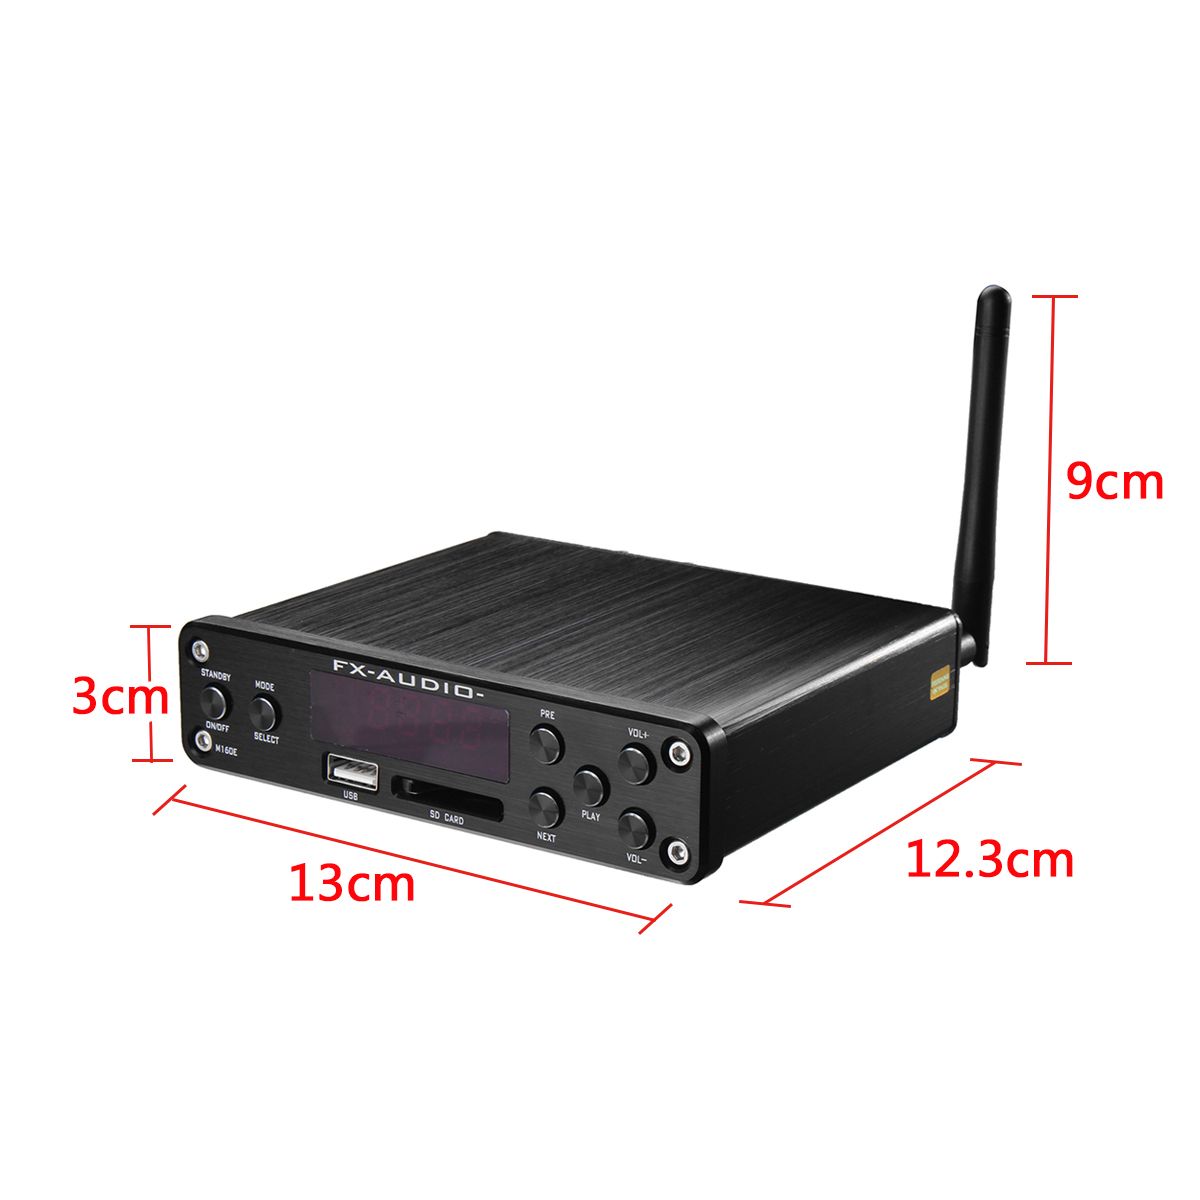 Home-Amplifier-220v-DC-32V-4OHM-2CH-bluetooth-40-Stereo-Amplifier-with-Remote-Control-Support-USB-Di-1269800